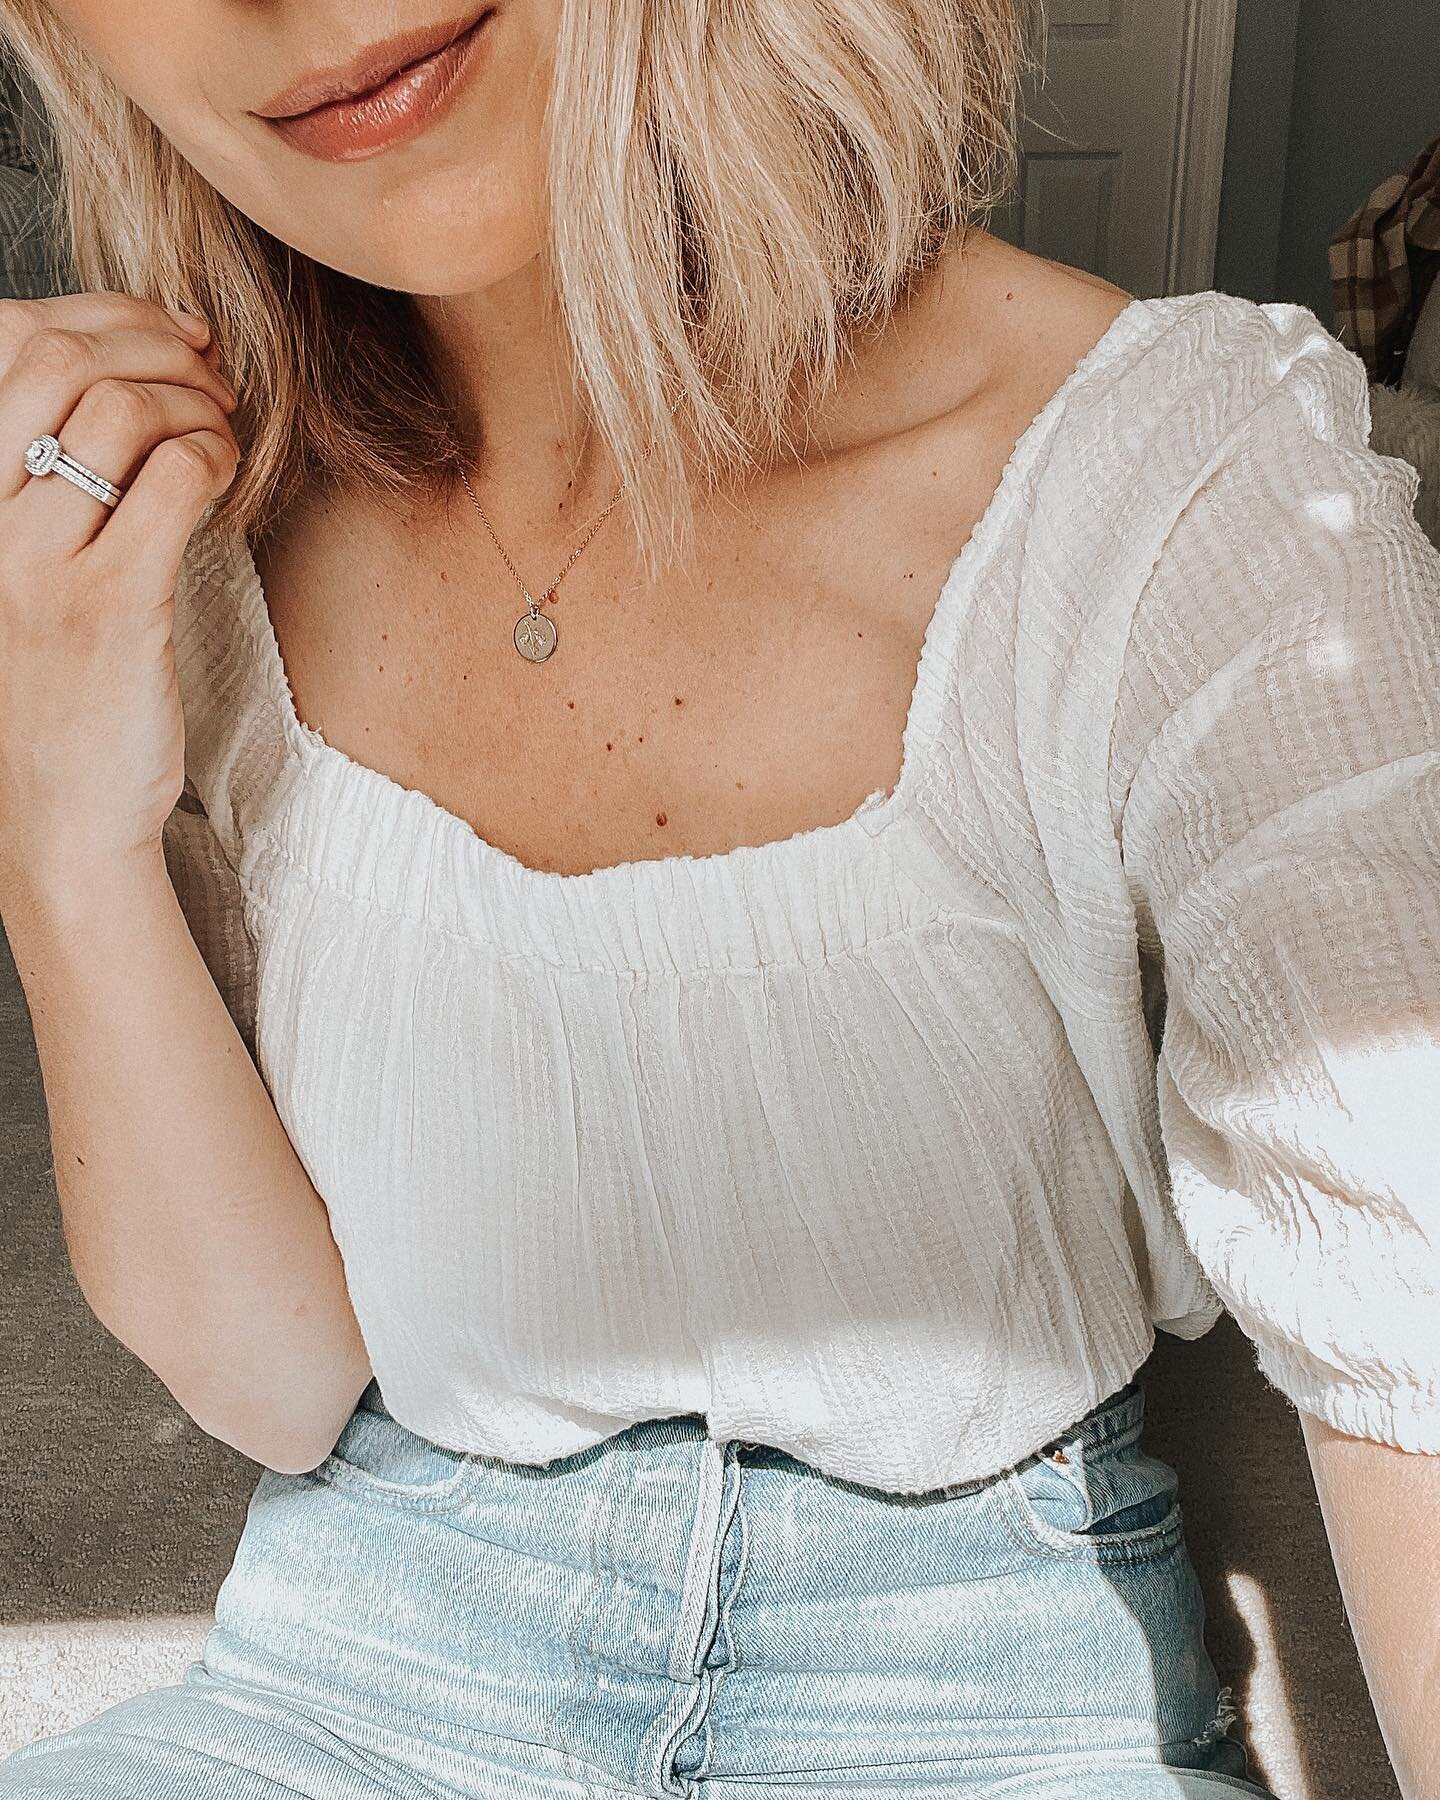 I know reels are all the rage, but I&rsquo;m still a sucker for a good in the moment  selfie. 

The @able Mother&rsquo;s Day sale is happening right now and this pretty top in included.

Celebrate the mamas your life or treat yourself. 

Code MELANIE